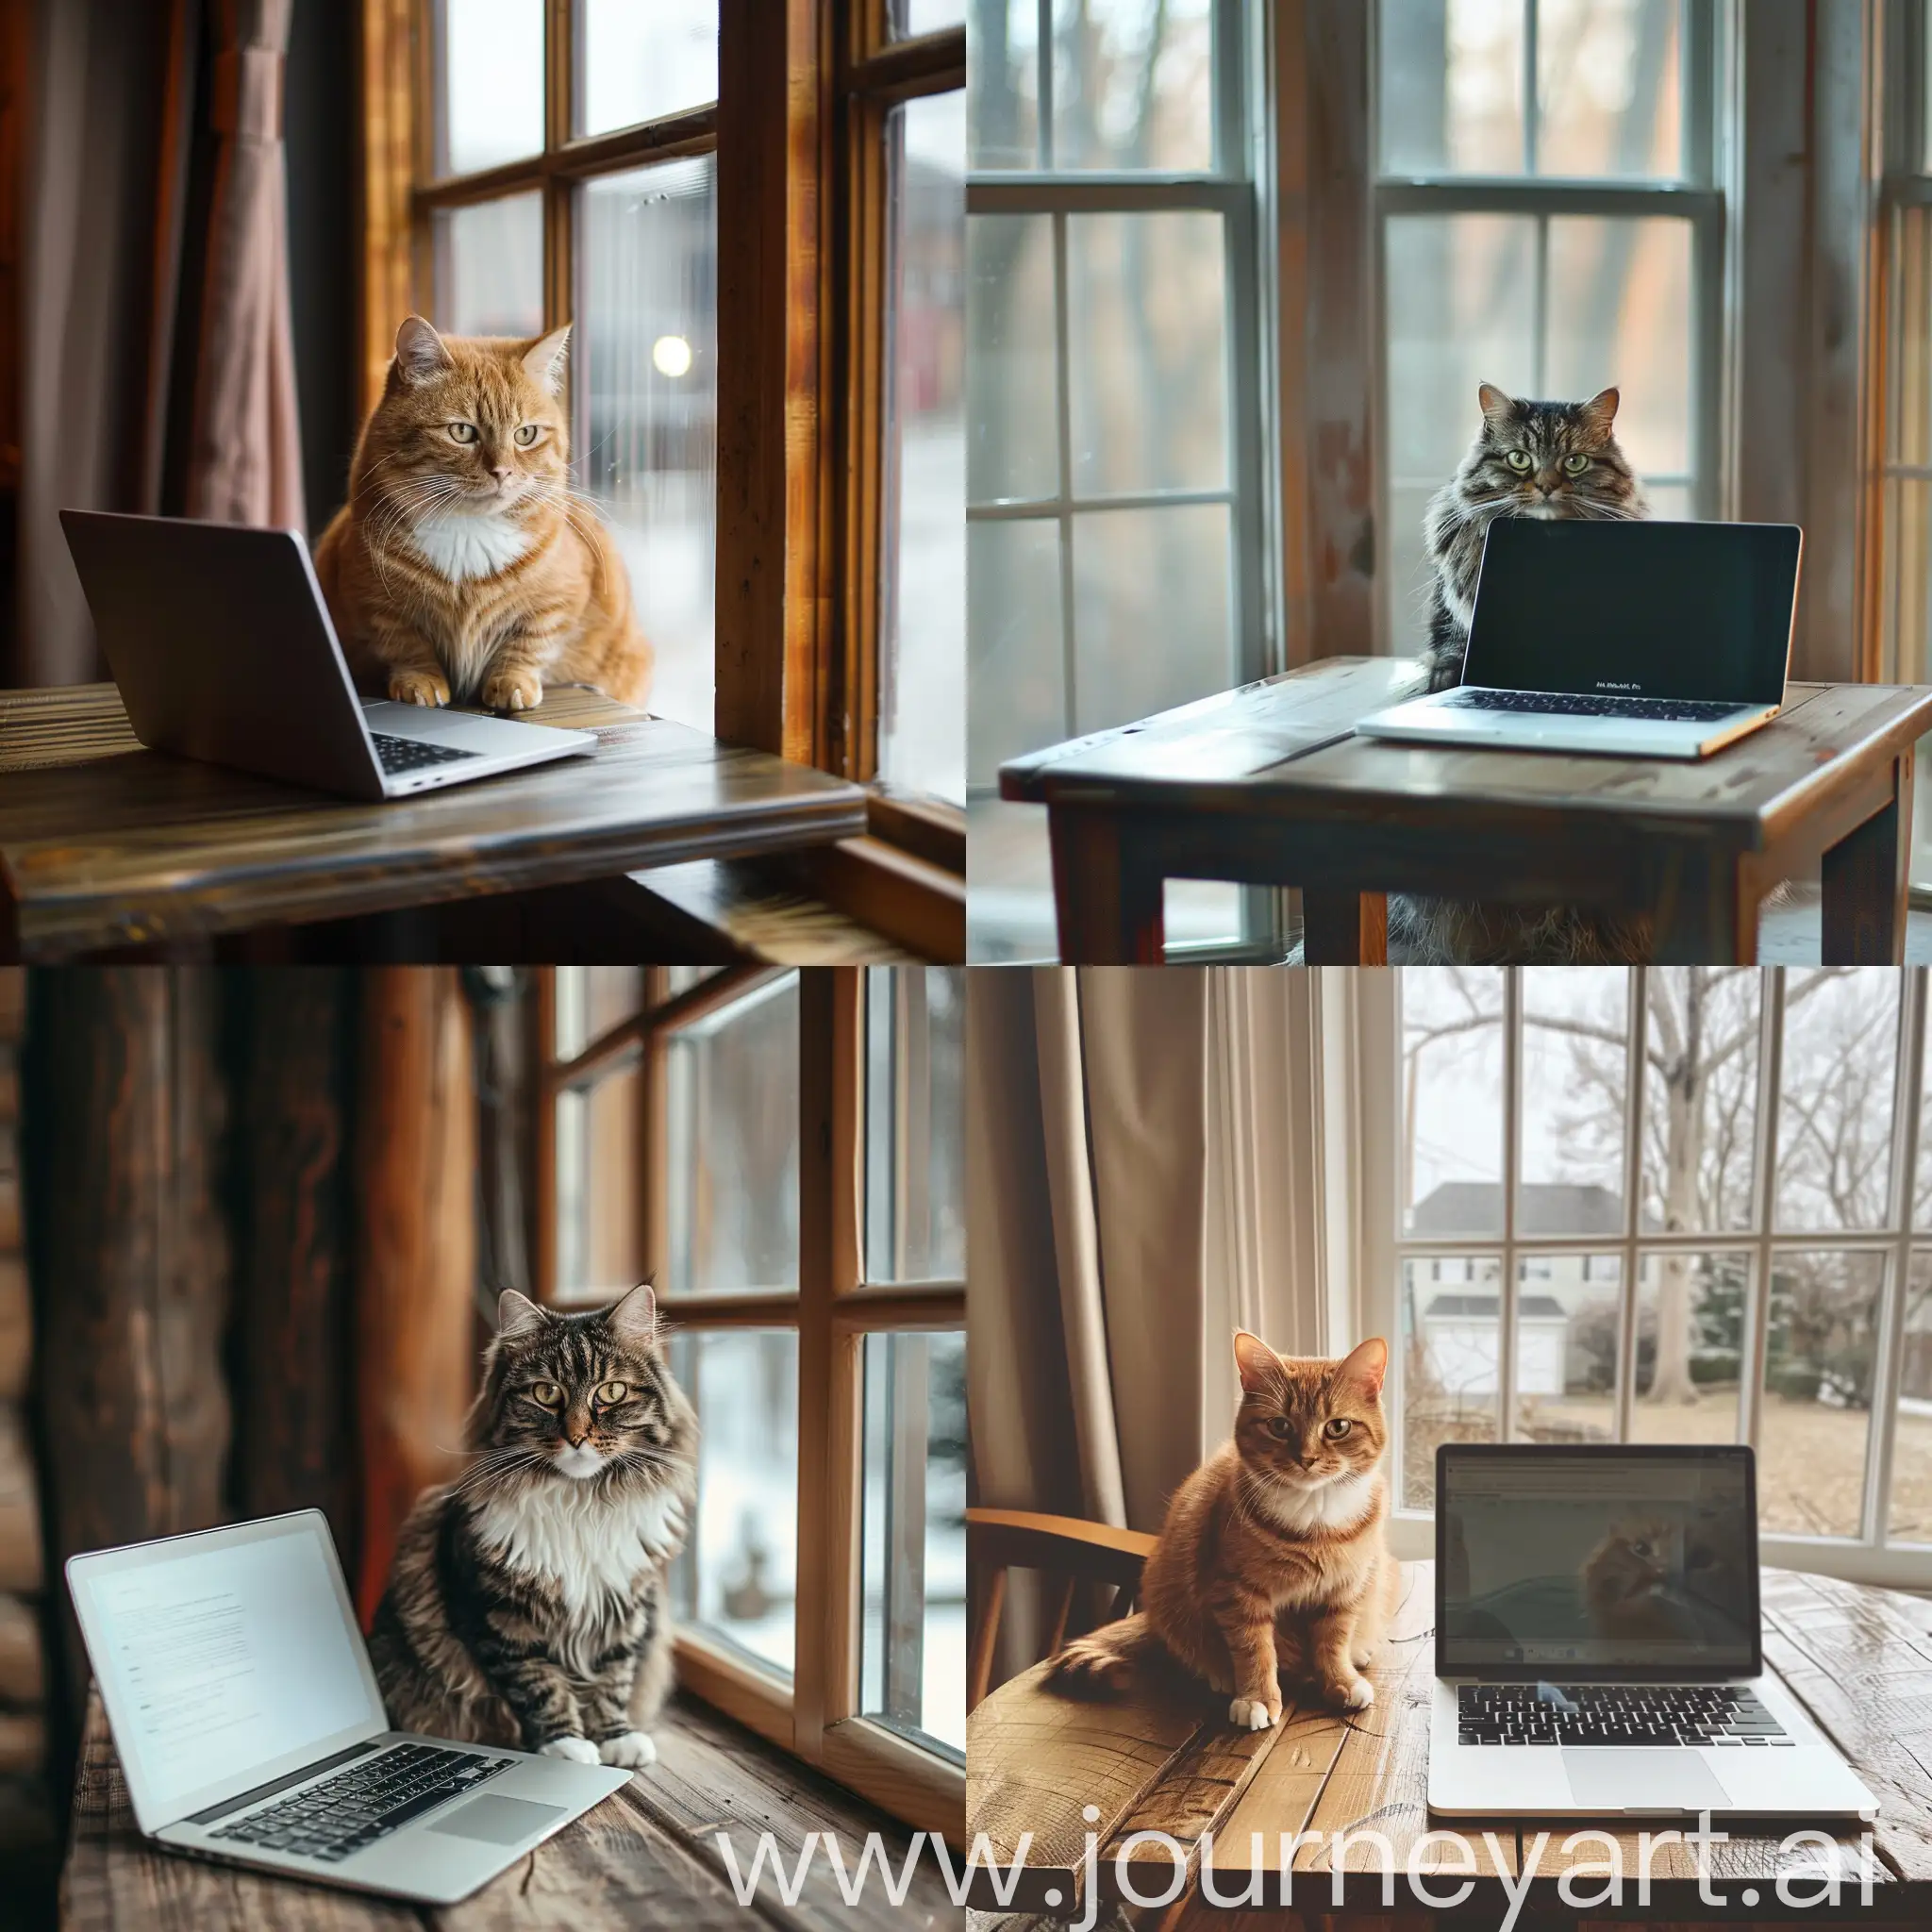 Bold-Cat-Working-on-a-Laptop-by-the-Window